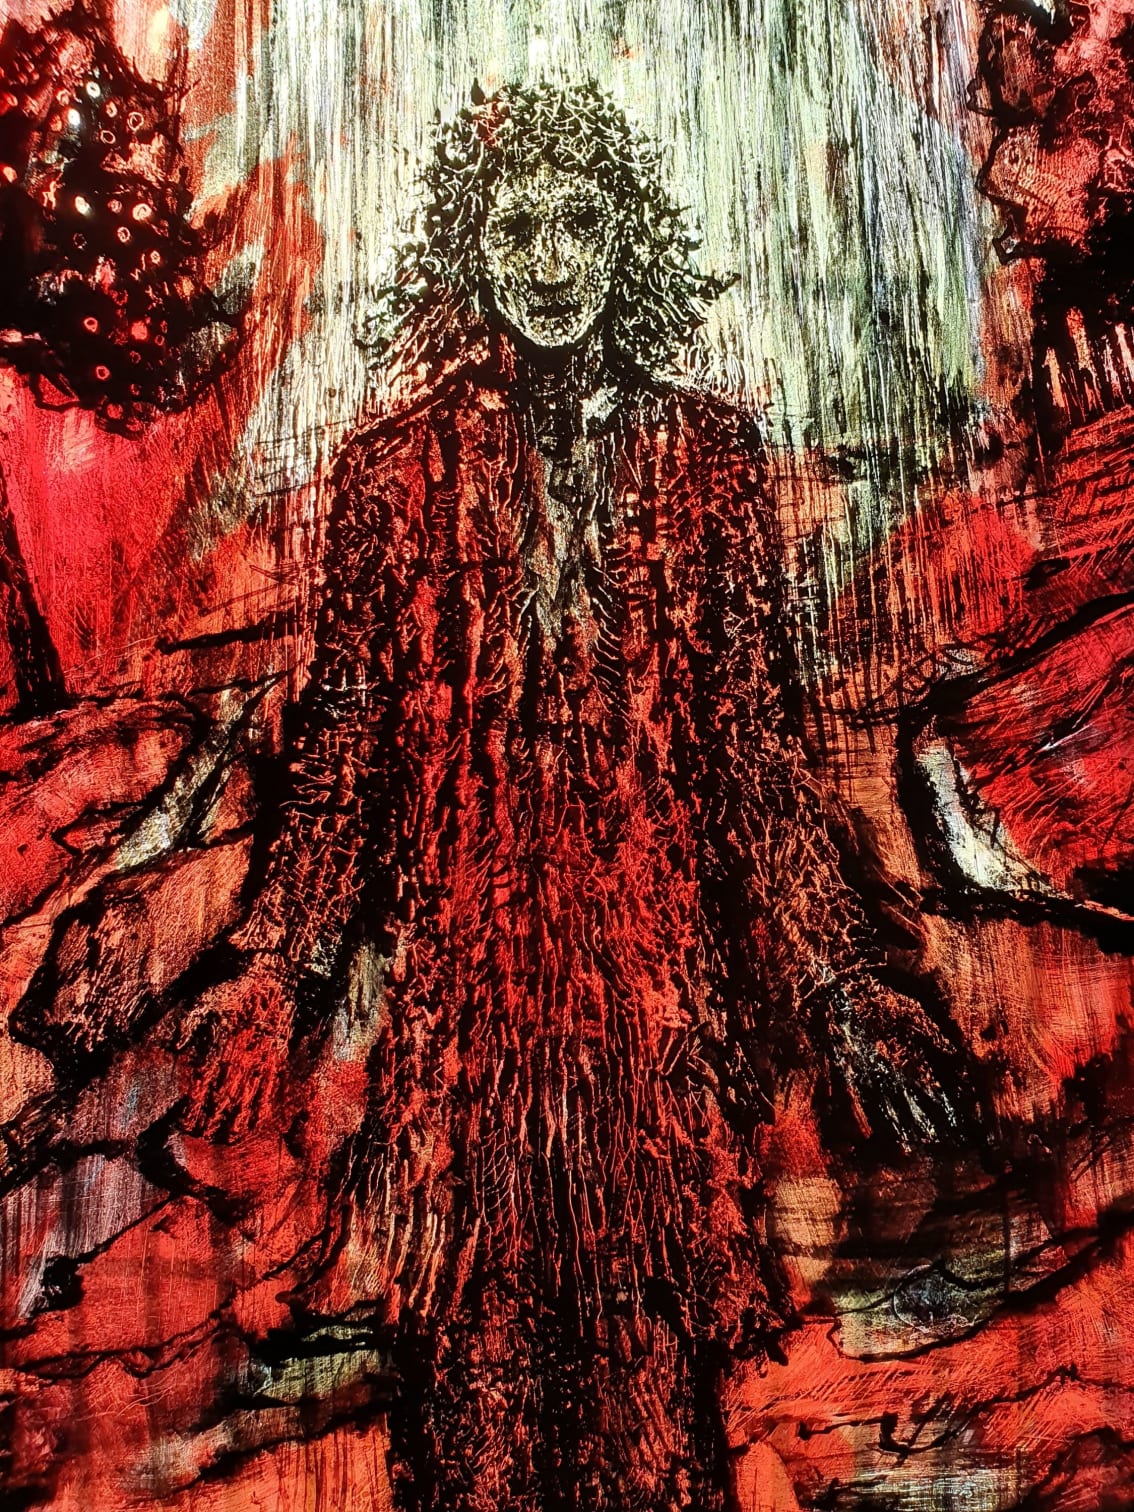 A close up of an illustration of a man, possibly Traherne, in the glass. The background is red and orange and the man is holding his palms outwards